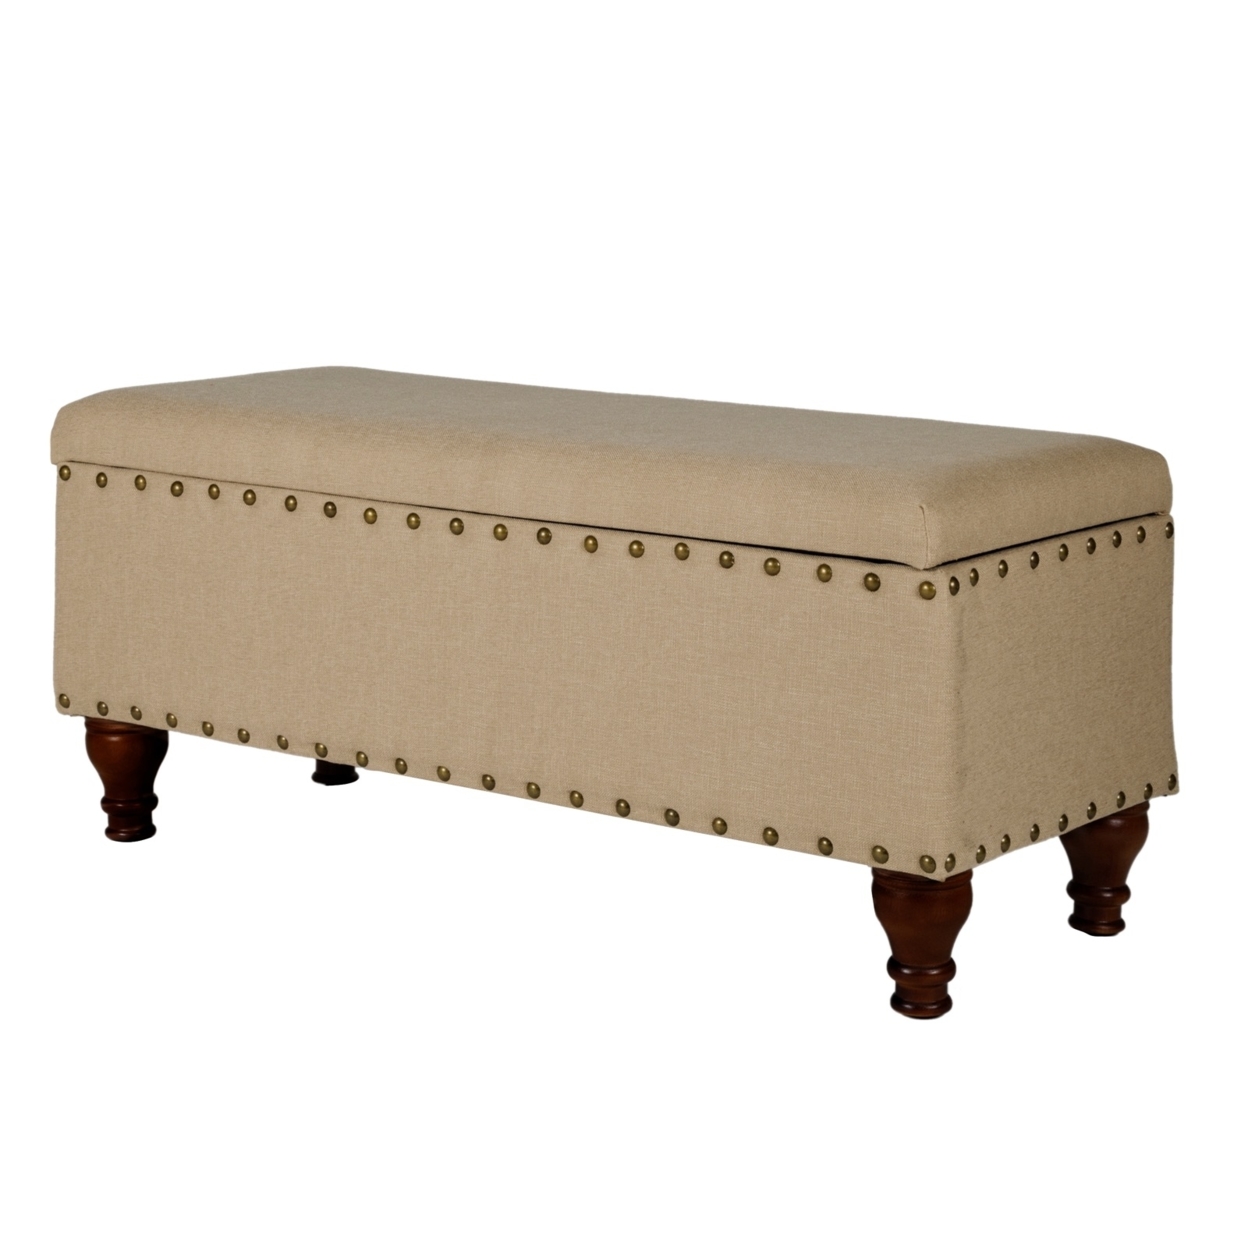 Fabric Upholstered Wooden Storage Bench With Nail head Trim, Large, Tan Brown